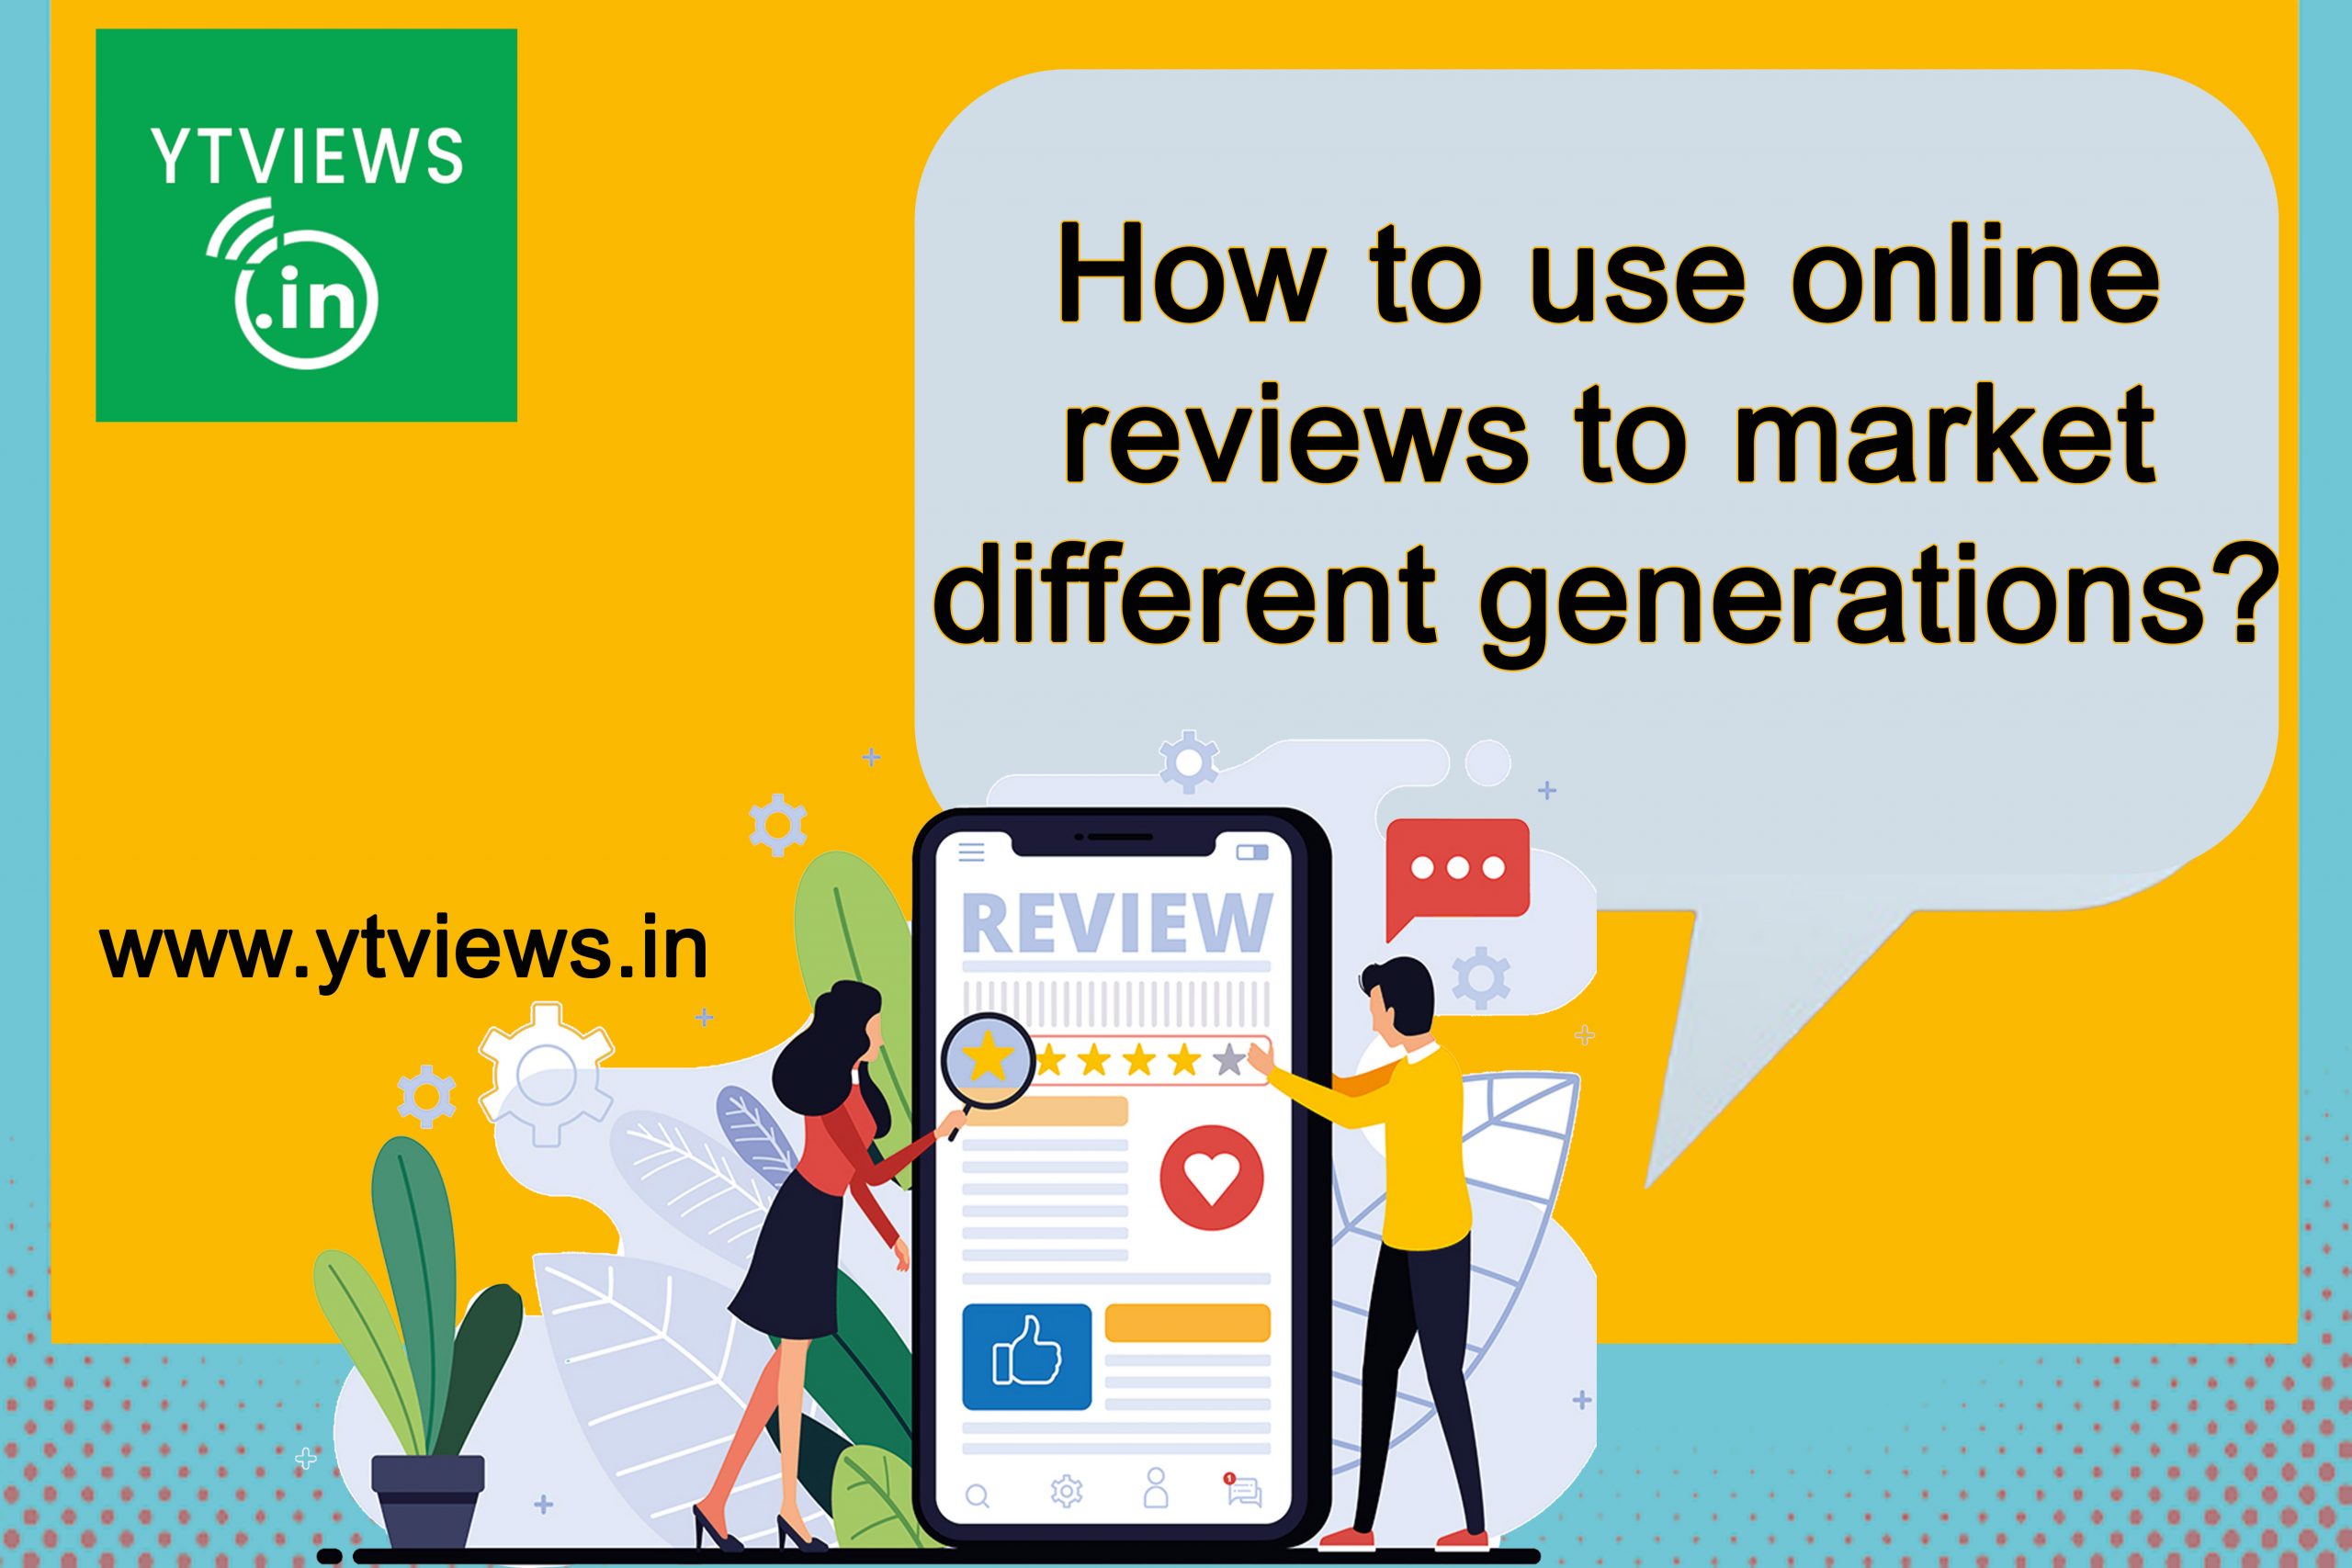 How to use online reviews to market different generations